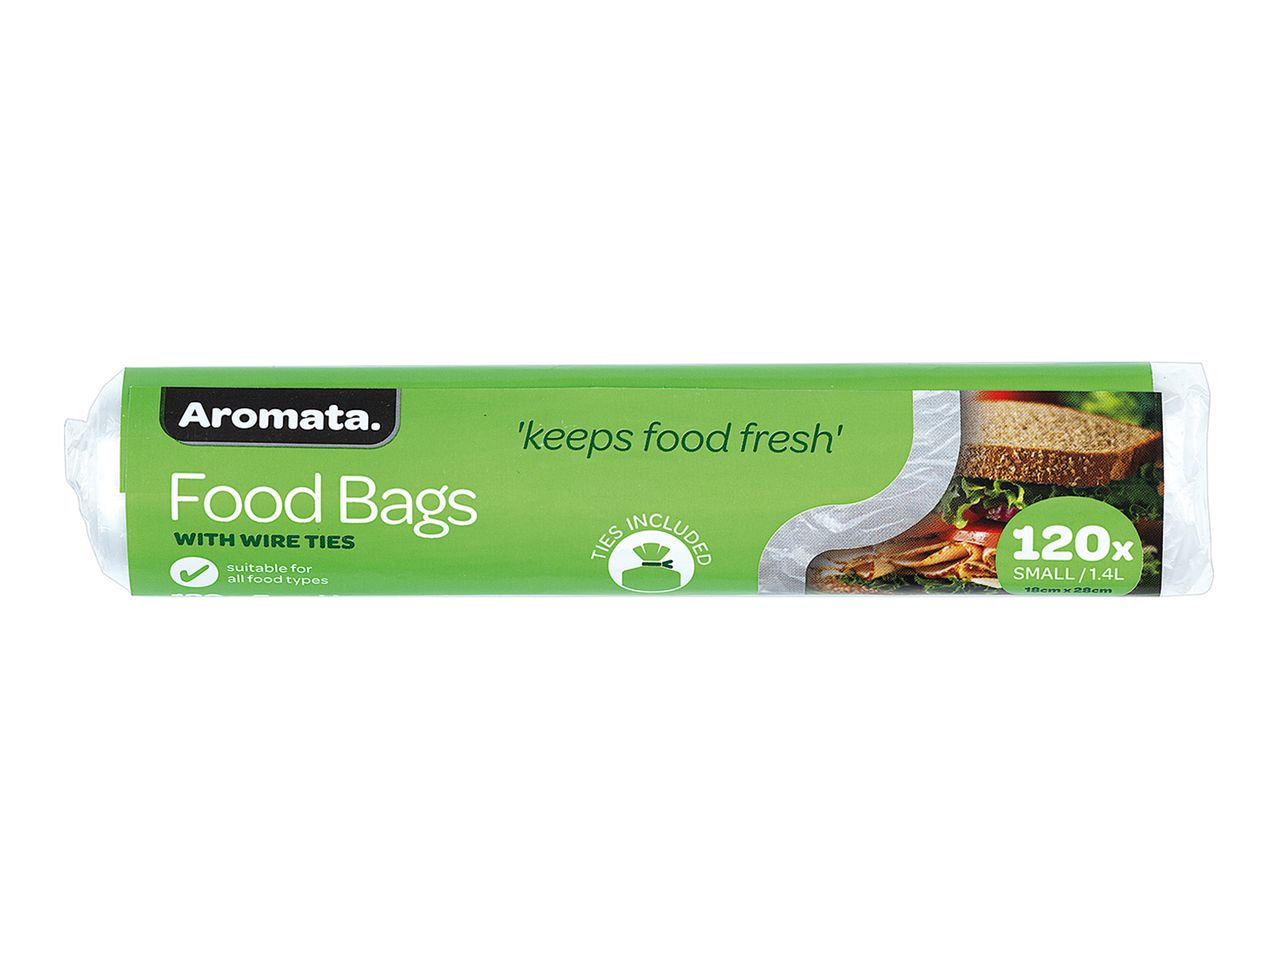 Go to full screen view: Aromata Sandwich Bags - Image 1